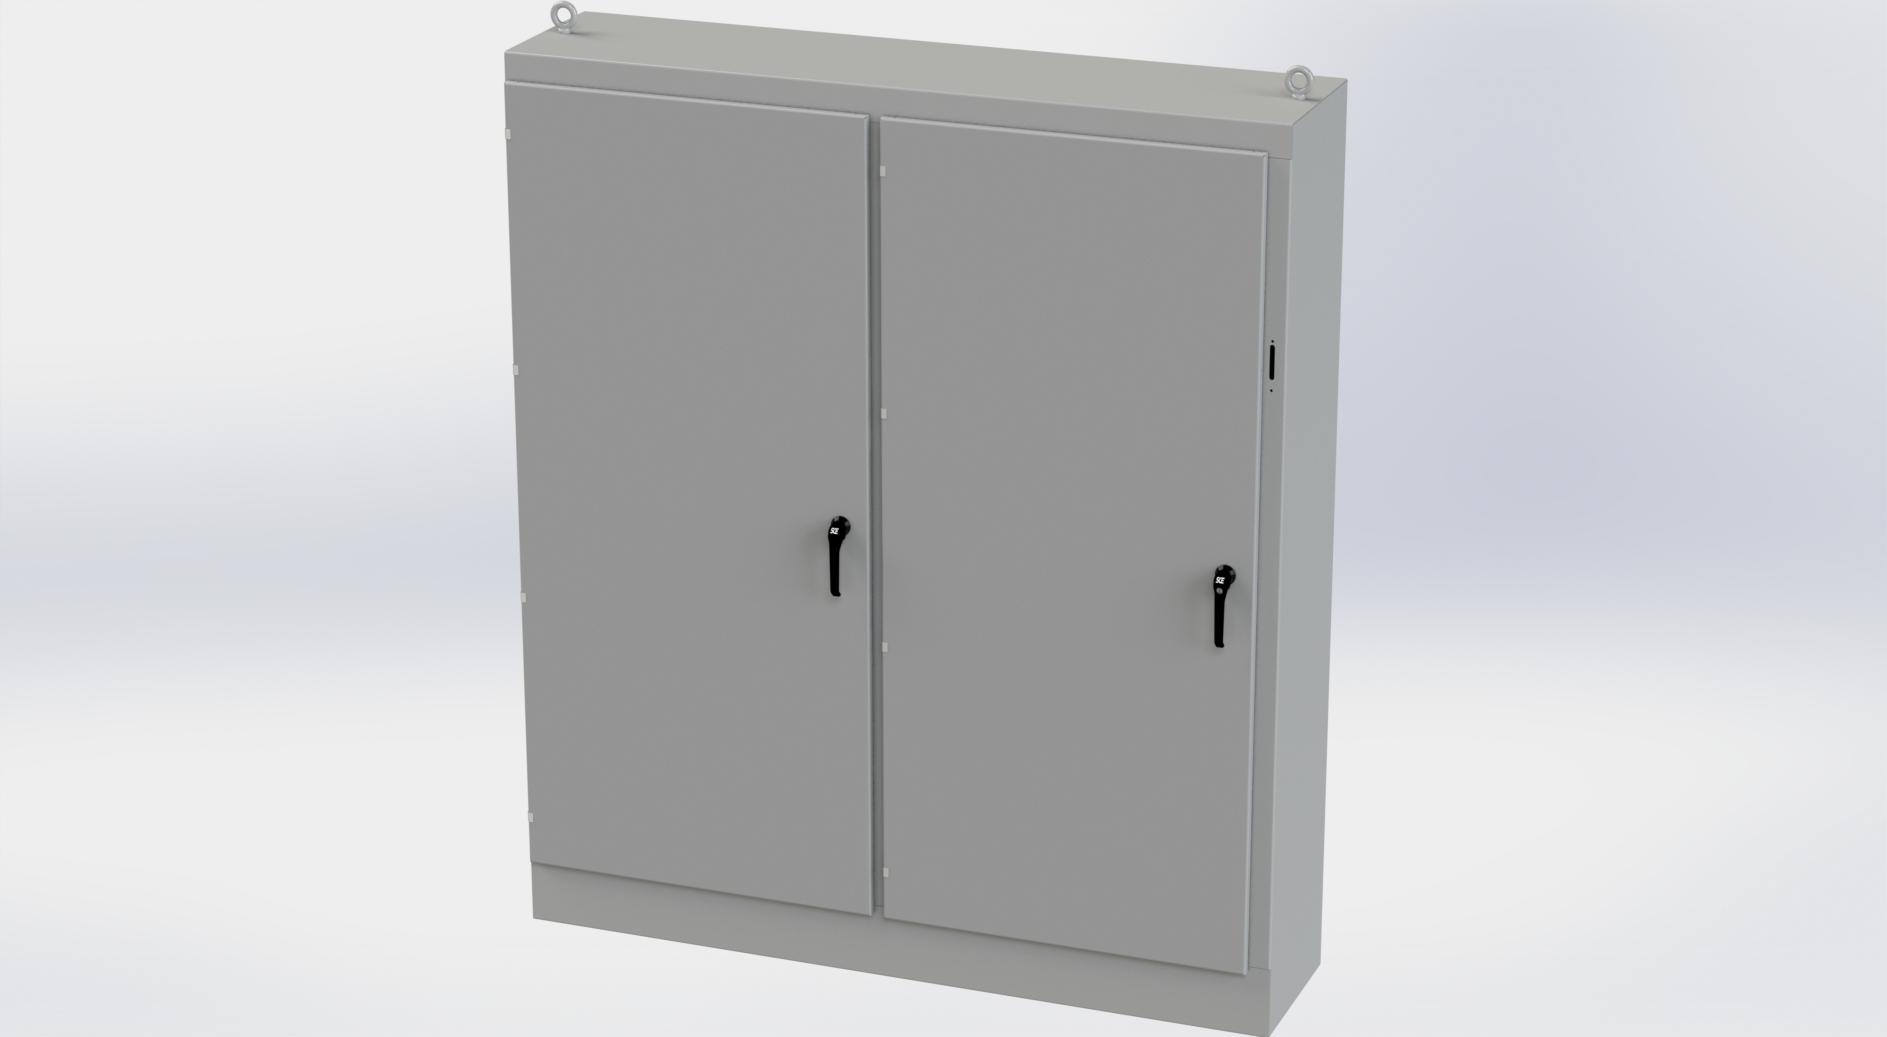 Saginaw Control SCE-90XM7818 2DR XM Enclosure, Height:90.00", Width:77.75", Depth:18.00", ANSI-61 gray powder coating inside and out. Sub-panels are powder coated white.